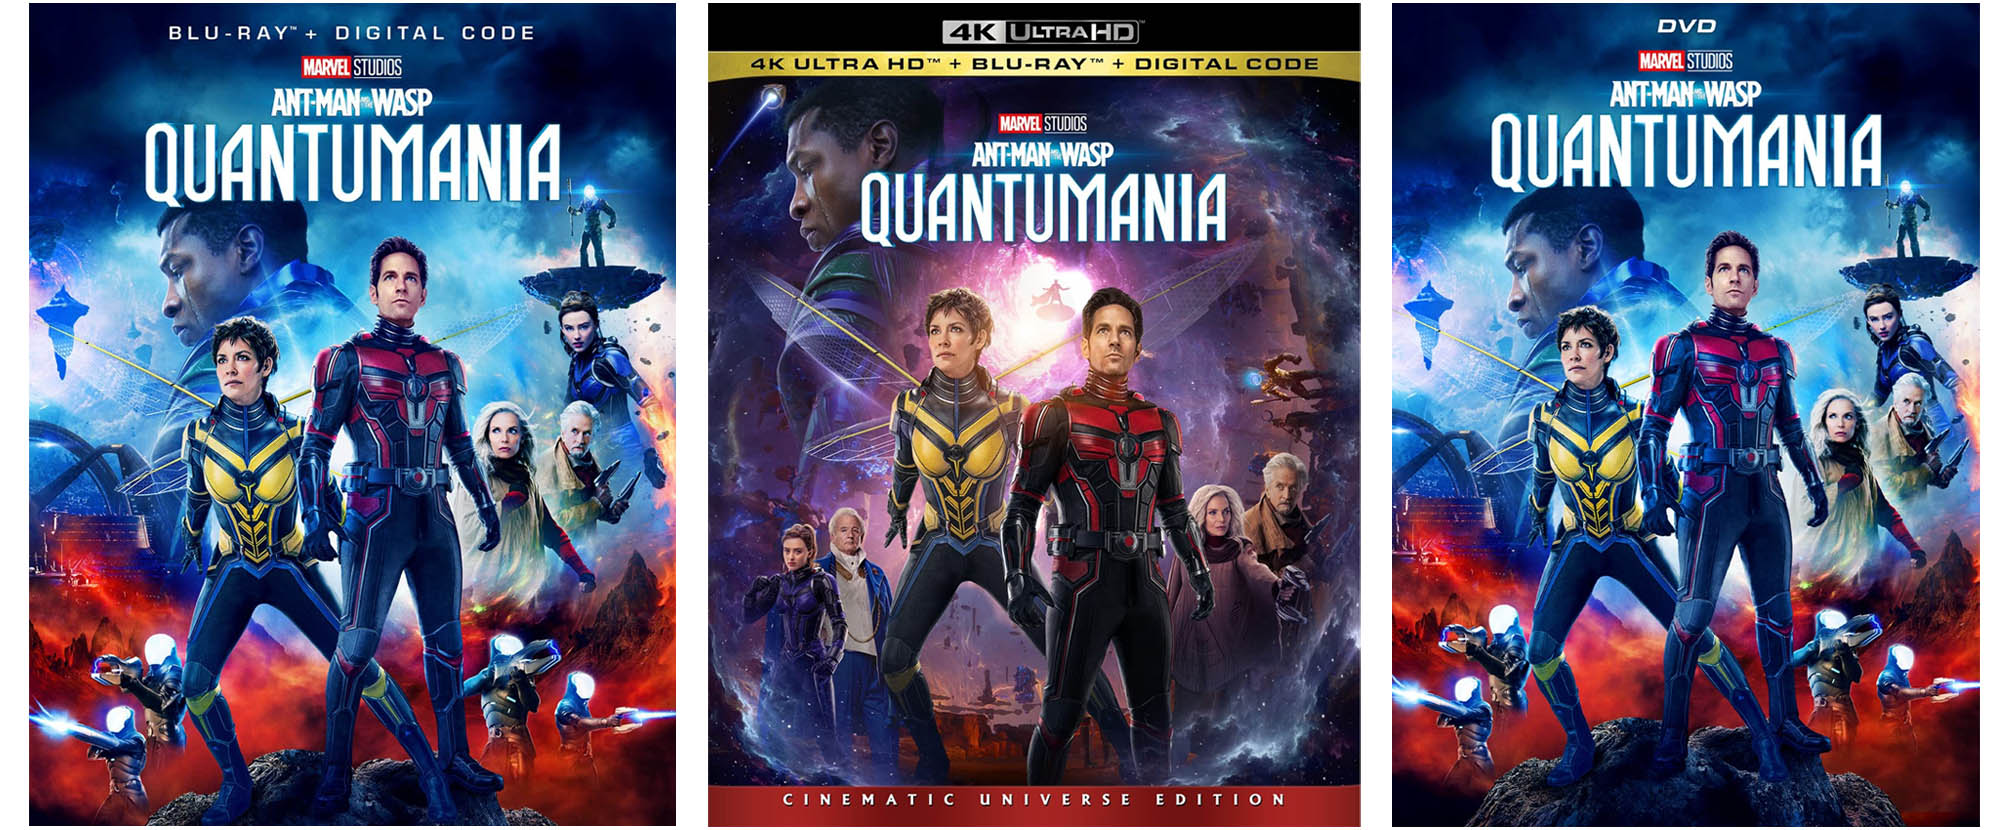 AntMan and the Wasp Quantumania 4k Bluray, Bluray & Digital Release